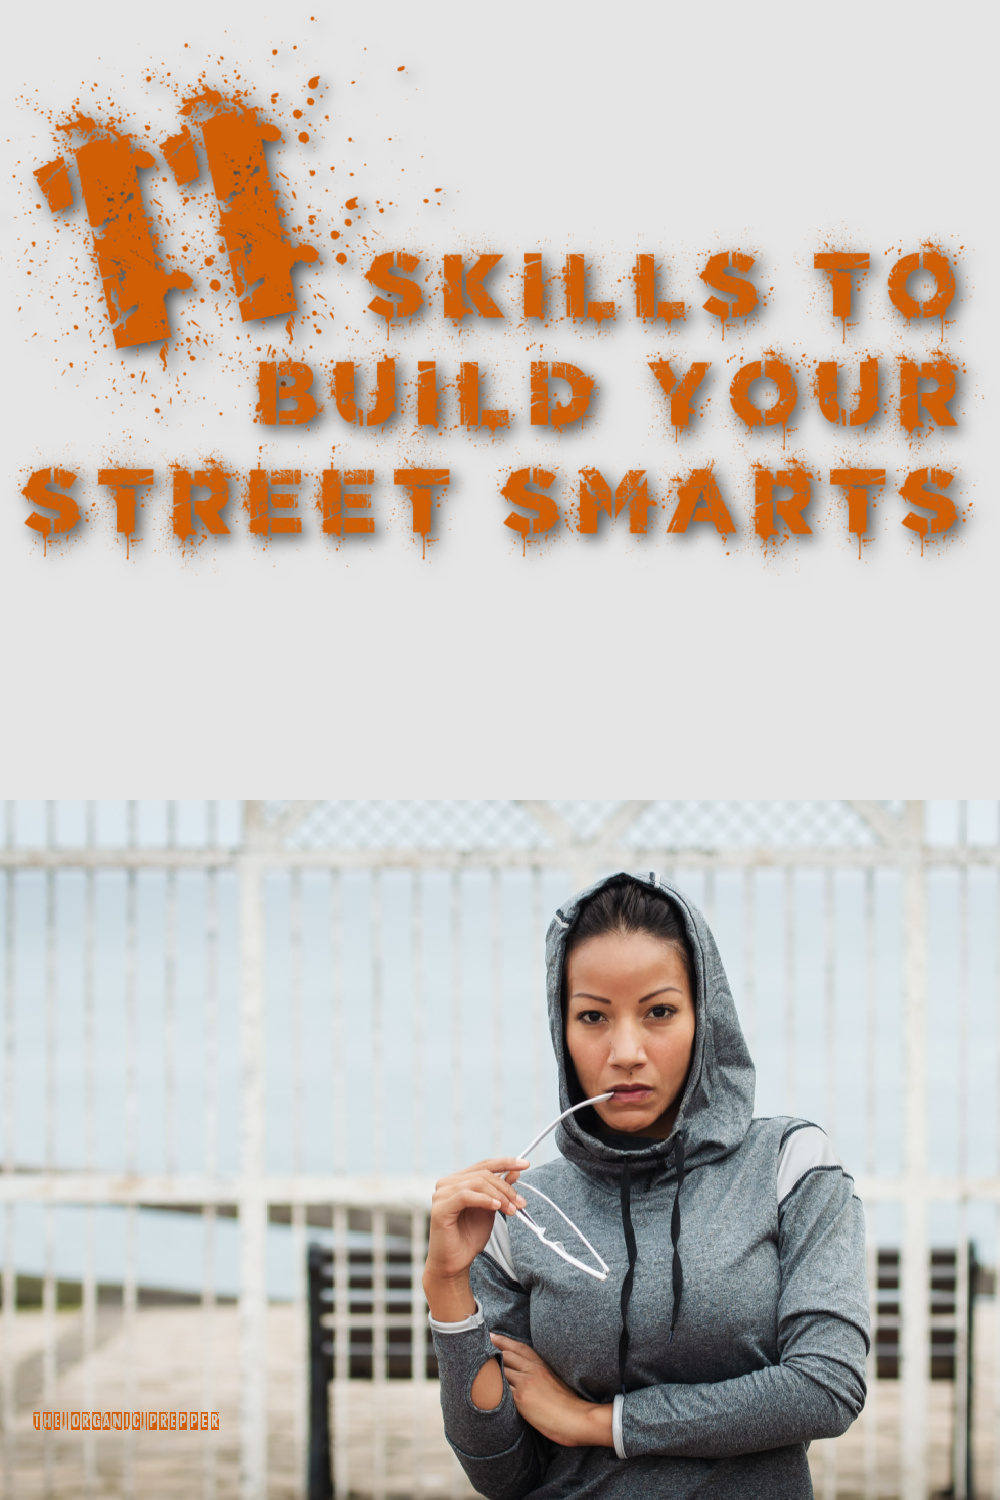 11 Skills to Build Your Street Smarts